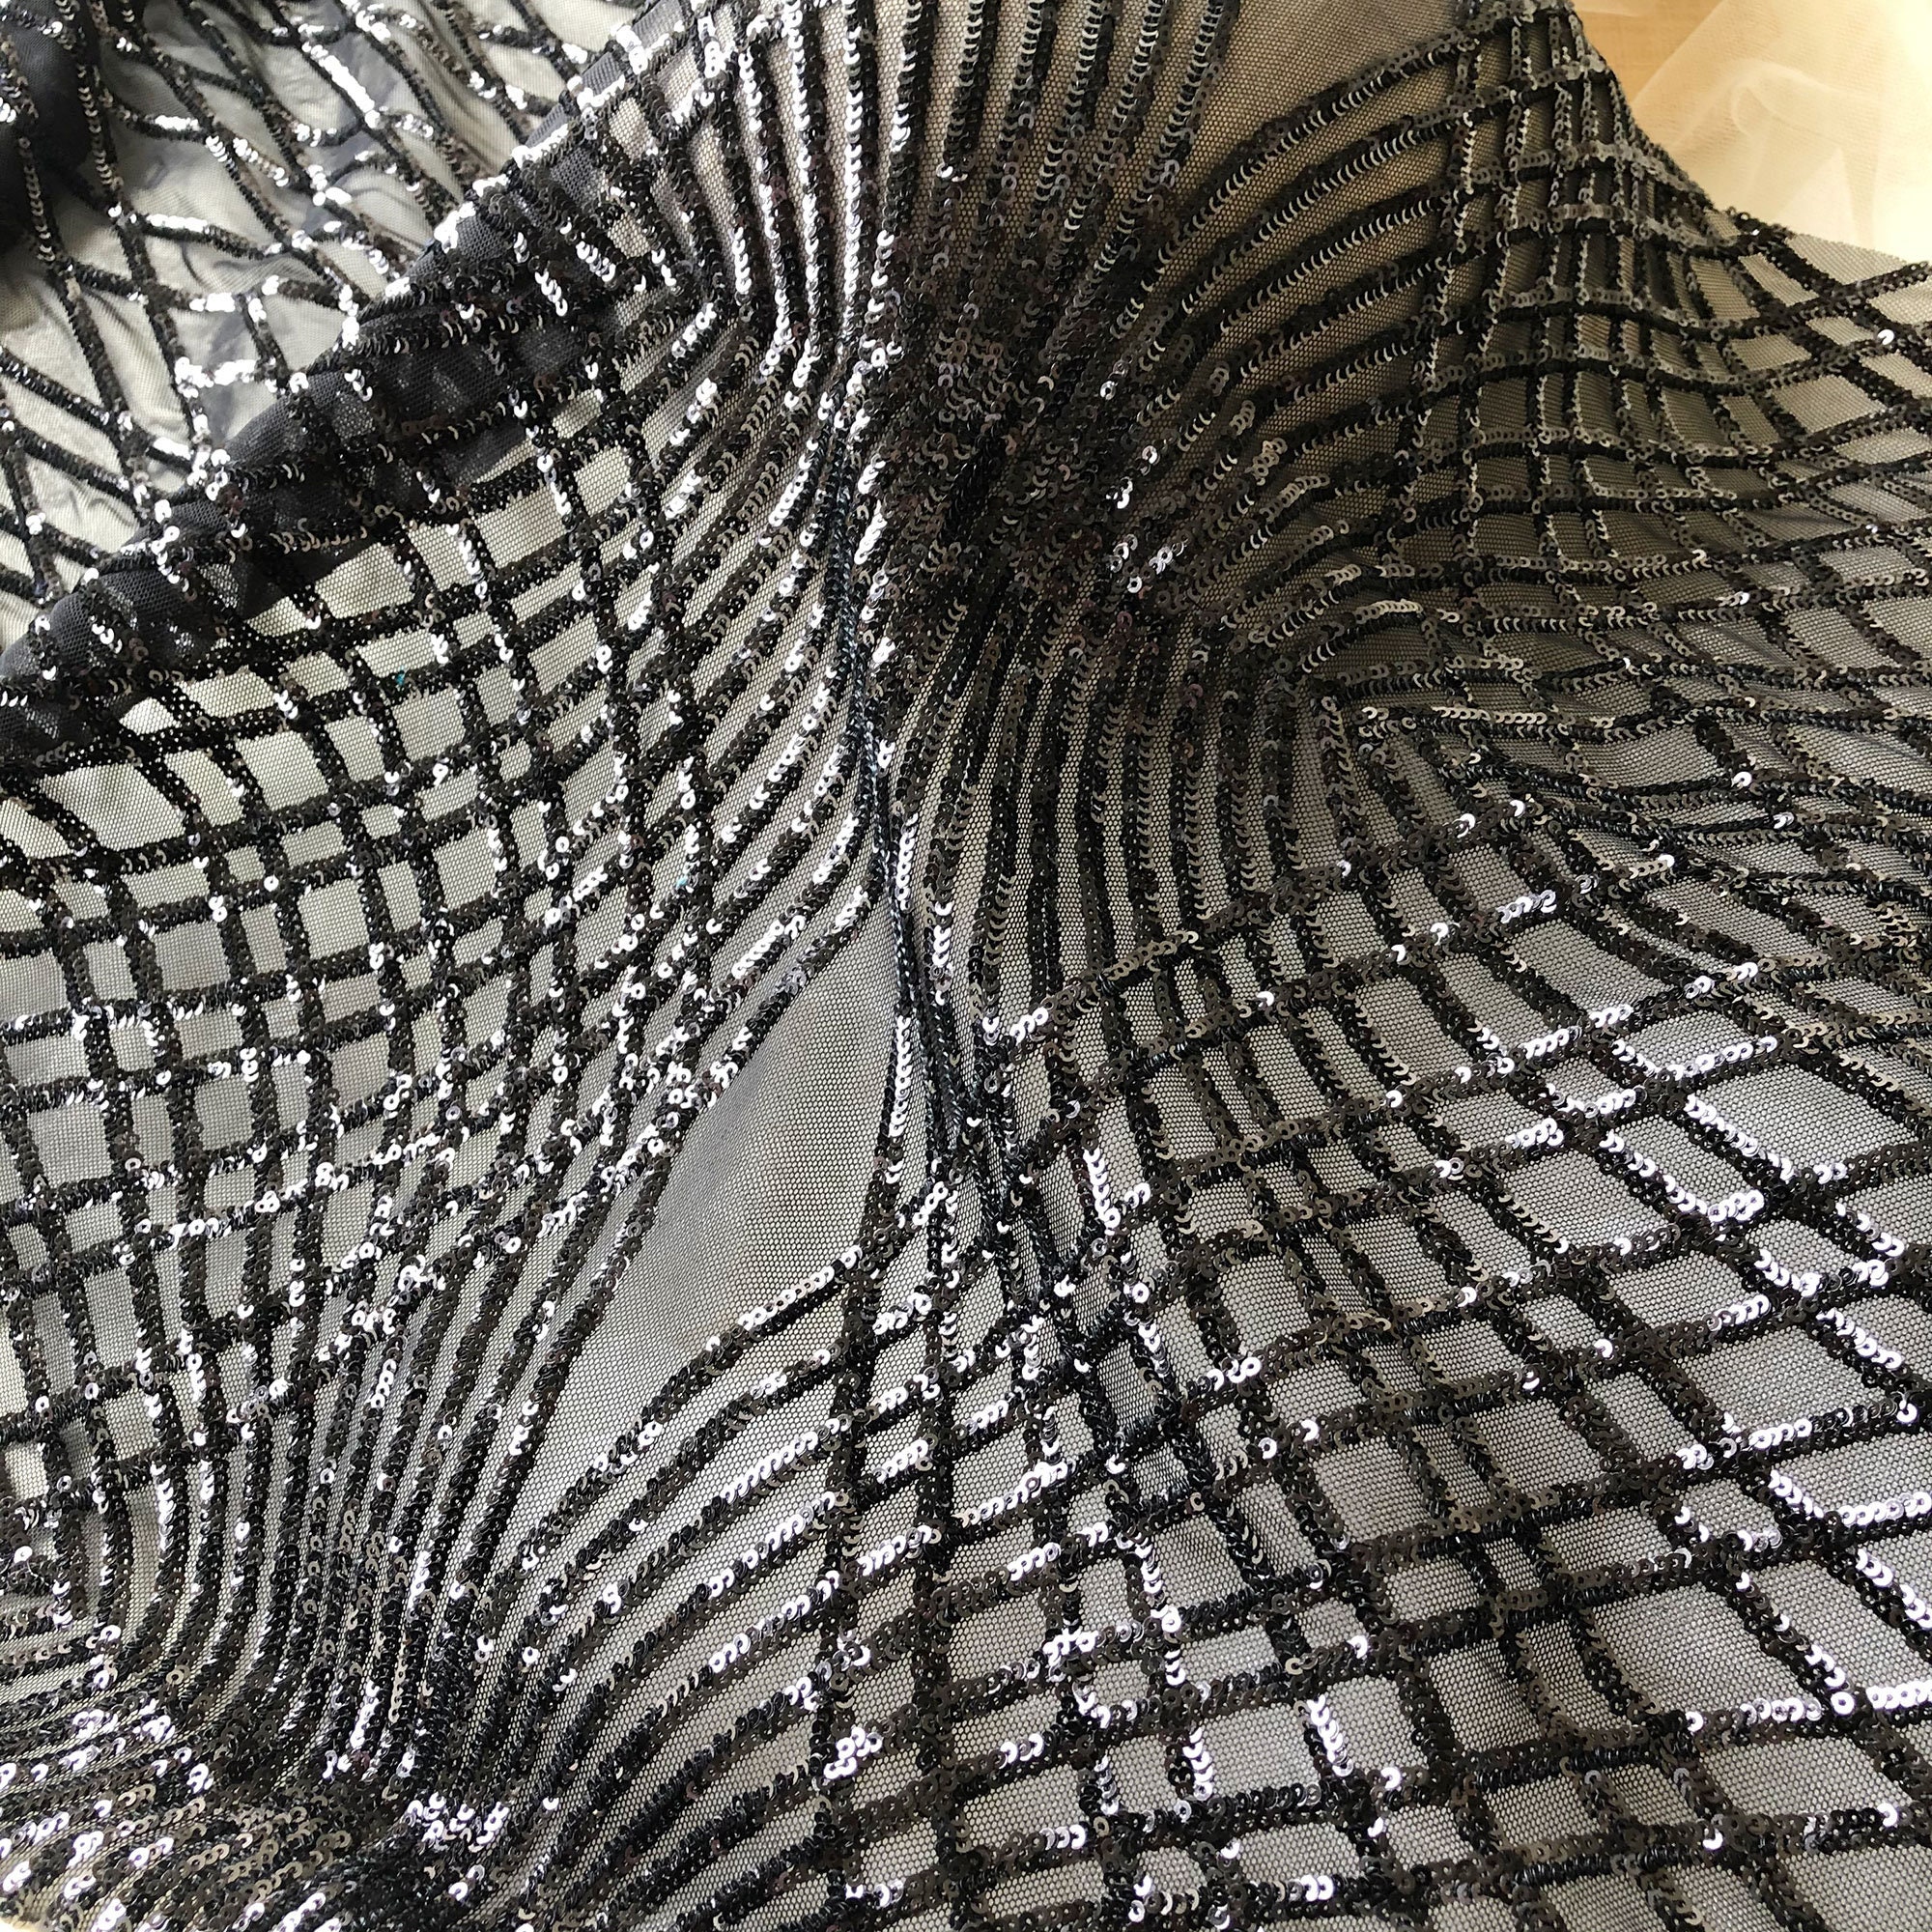 Black Sequined Lace Fabric by the Yard Shimmery Sequin Lace - Etsy